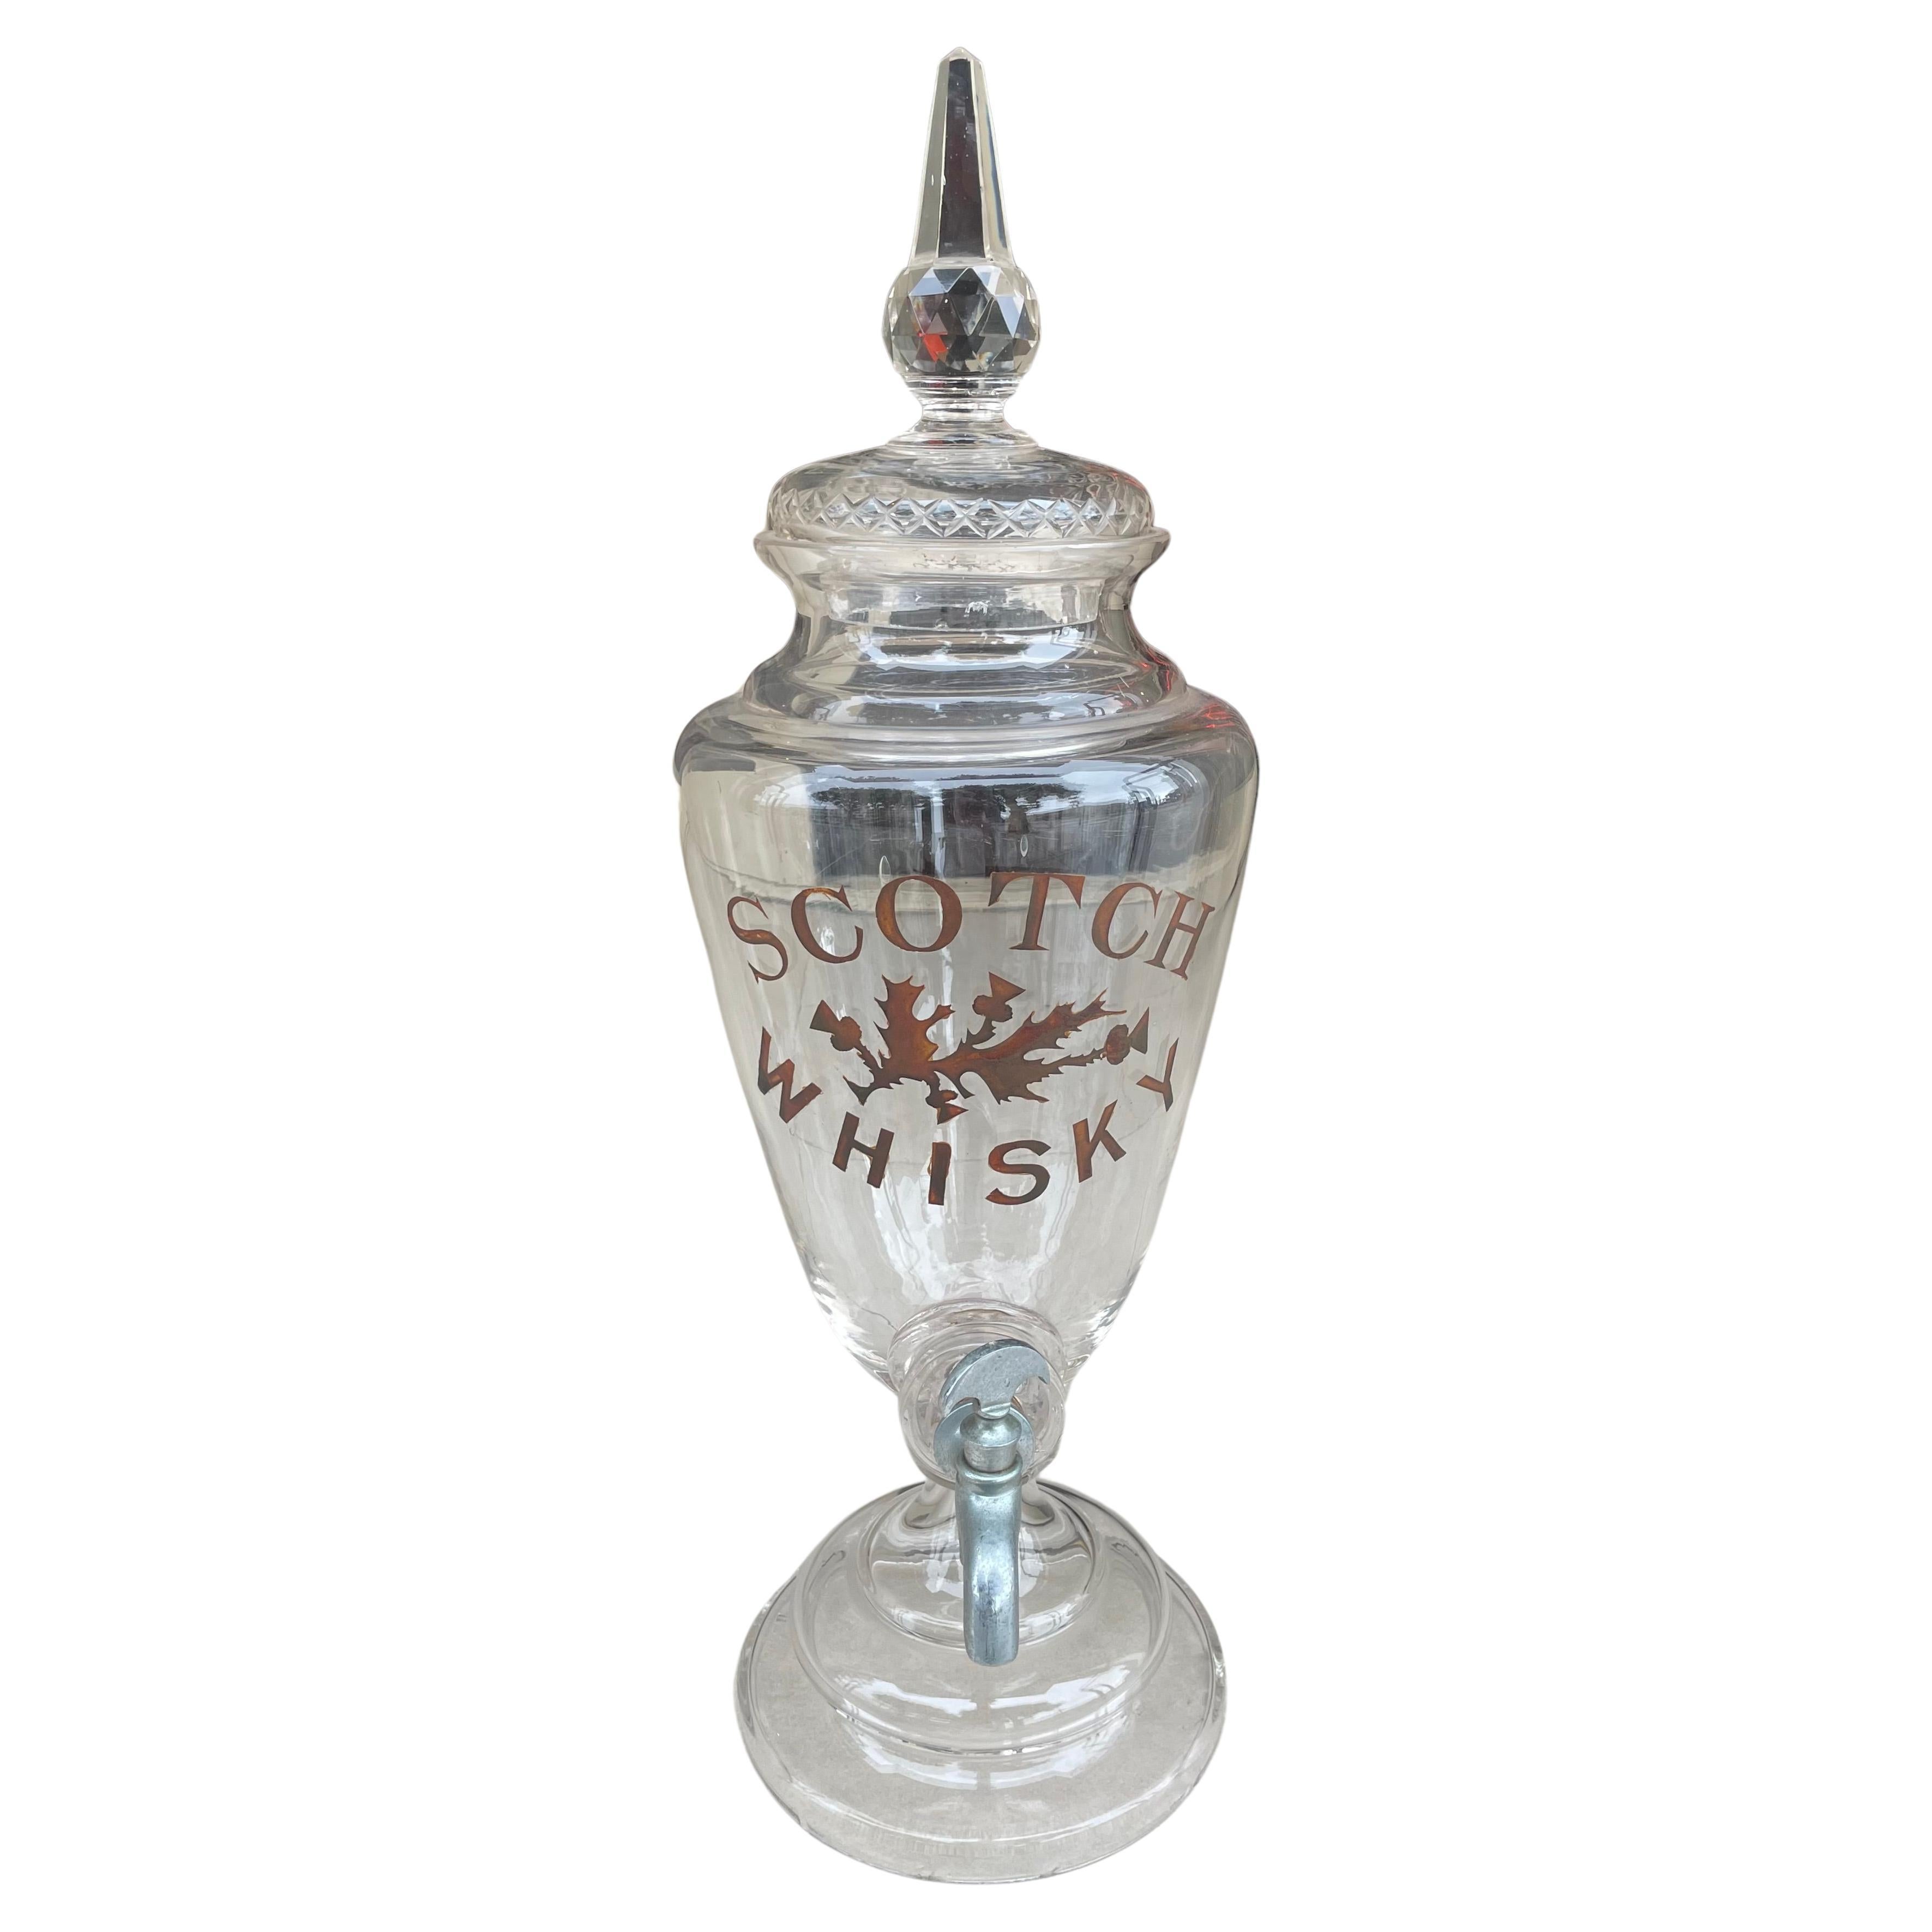 Vintage Cut Glass Scotch Whiskey Decanter For Sale